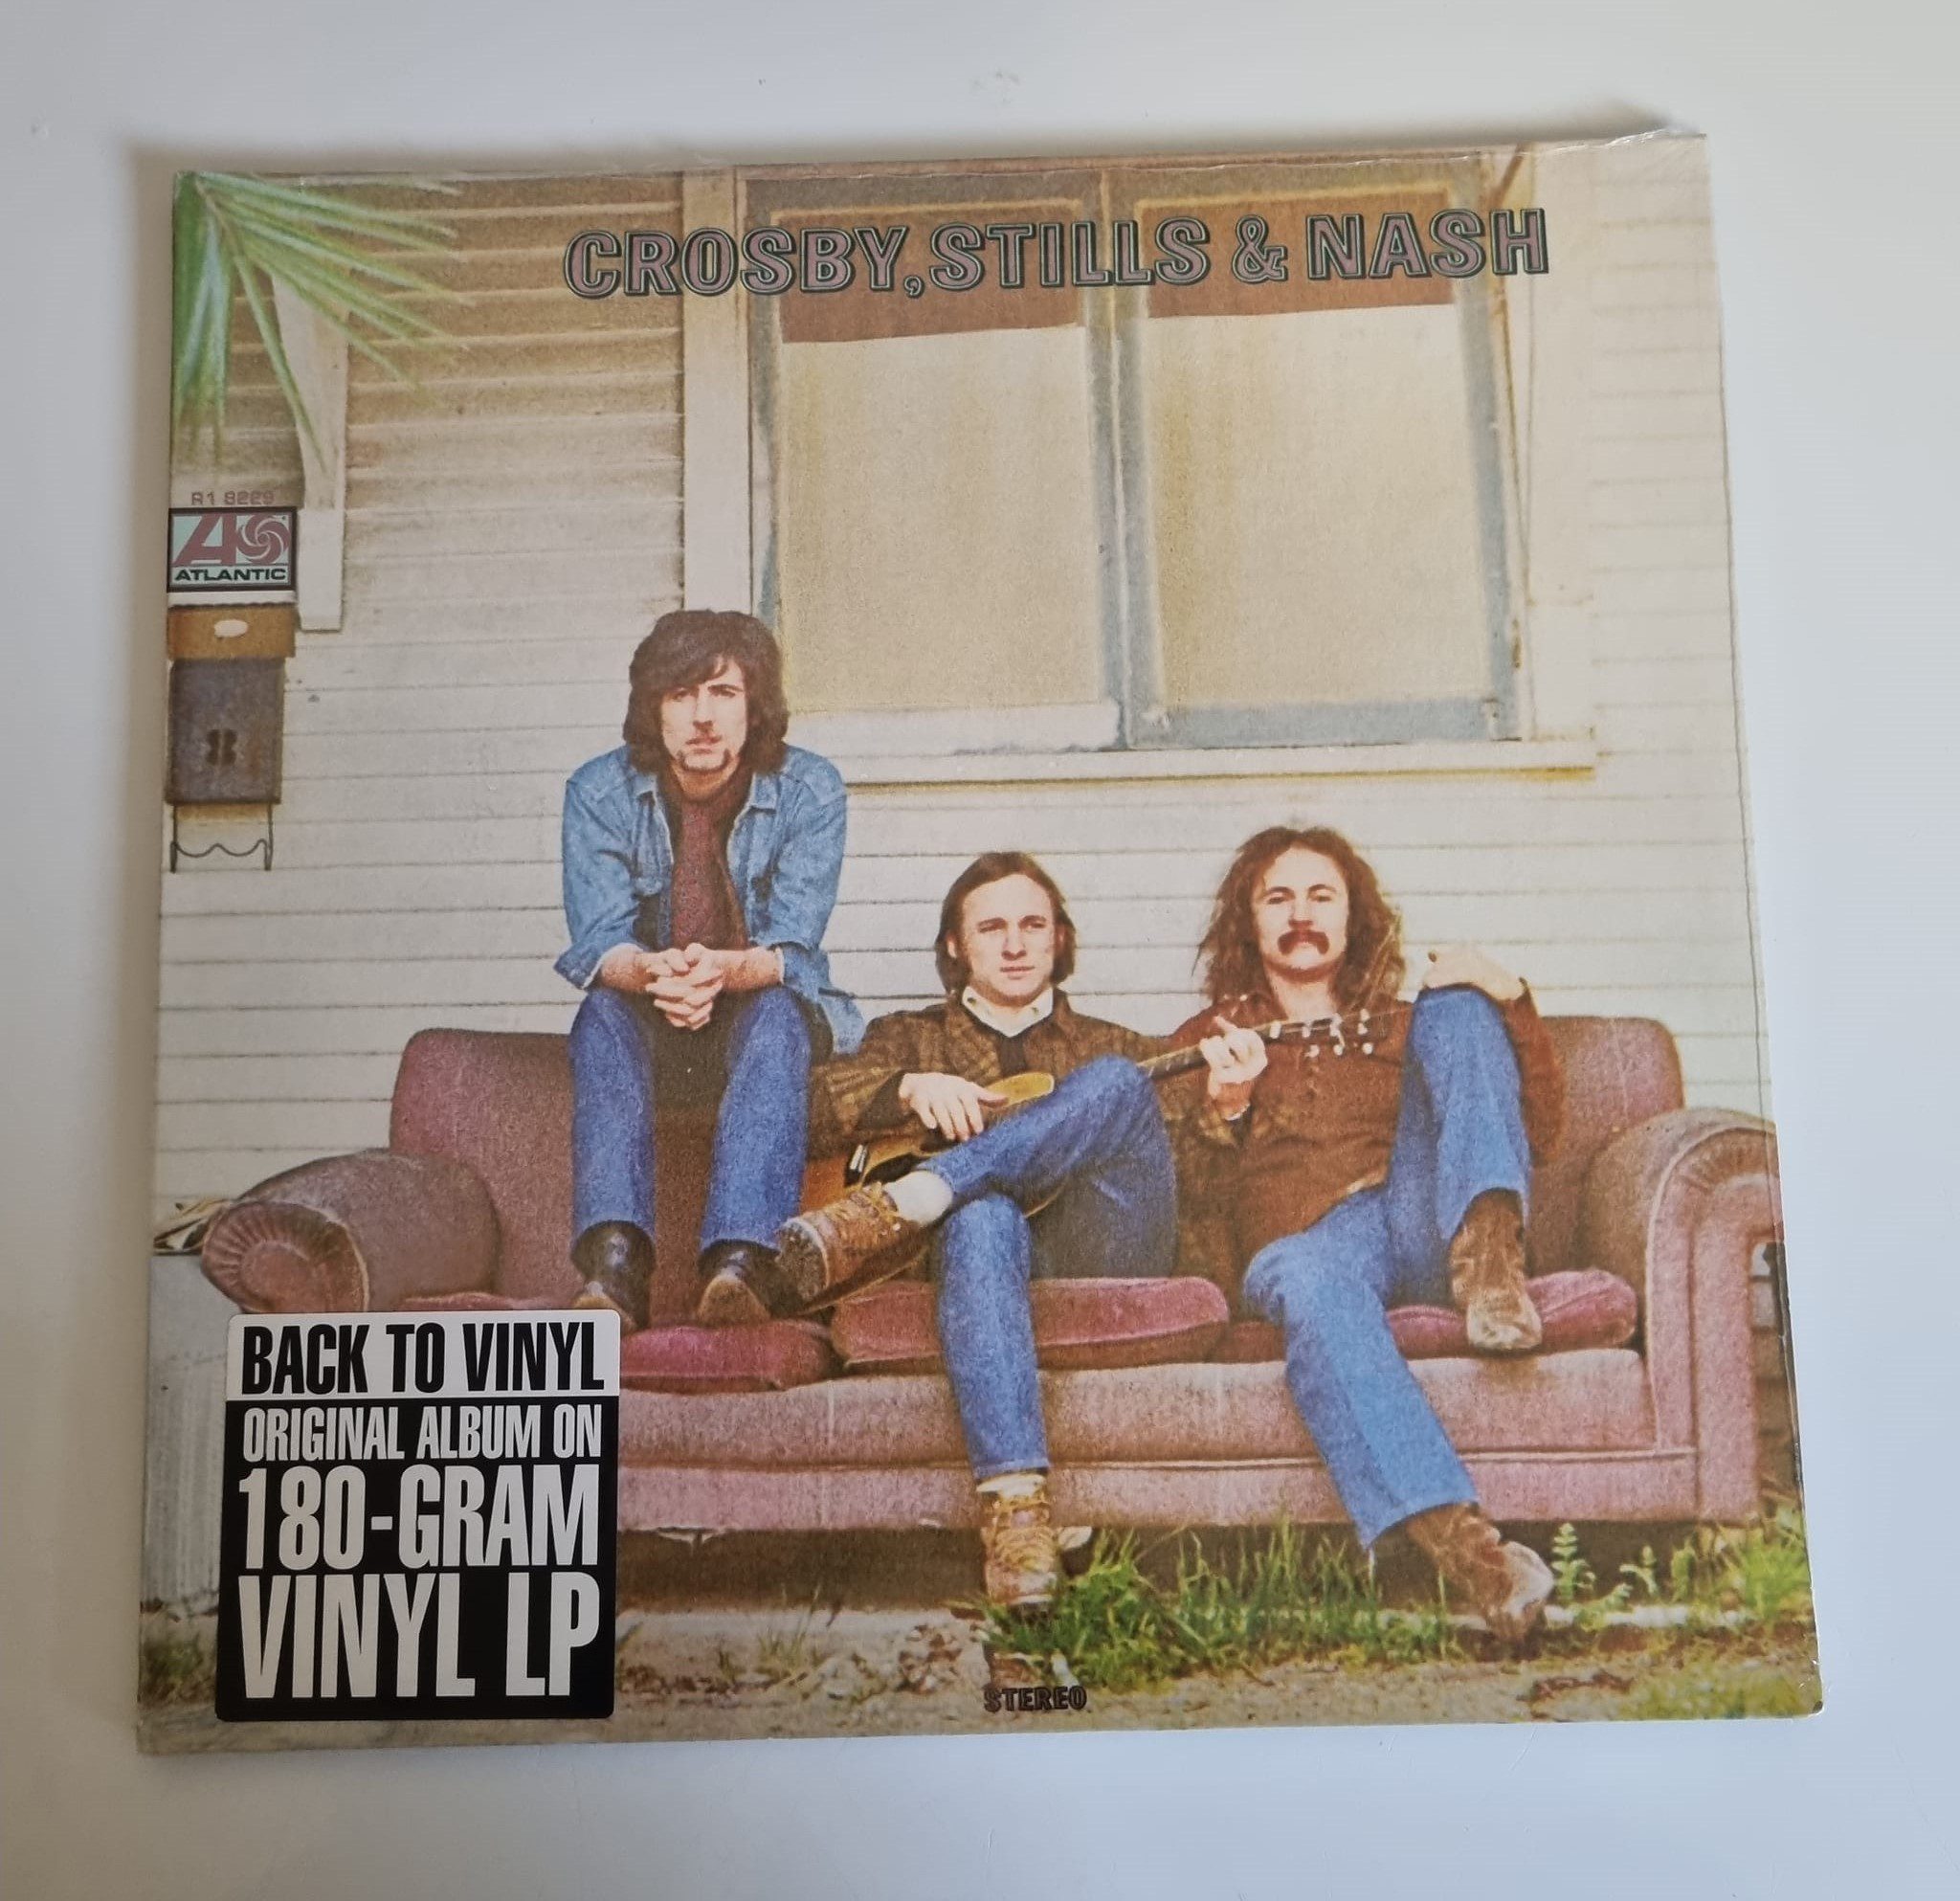 Buy this rare Crosby Stills & Nash record by clicking here